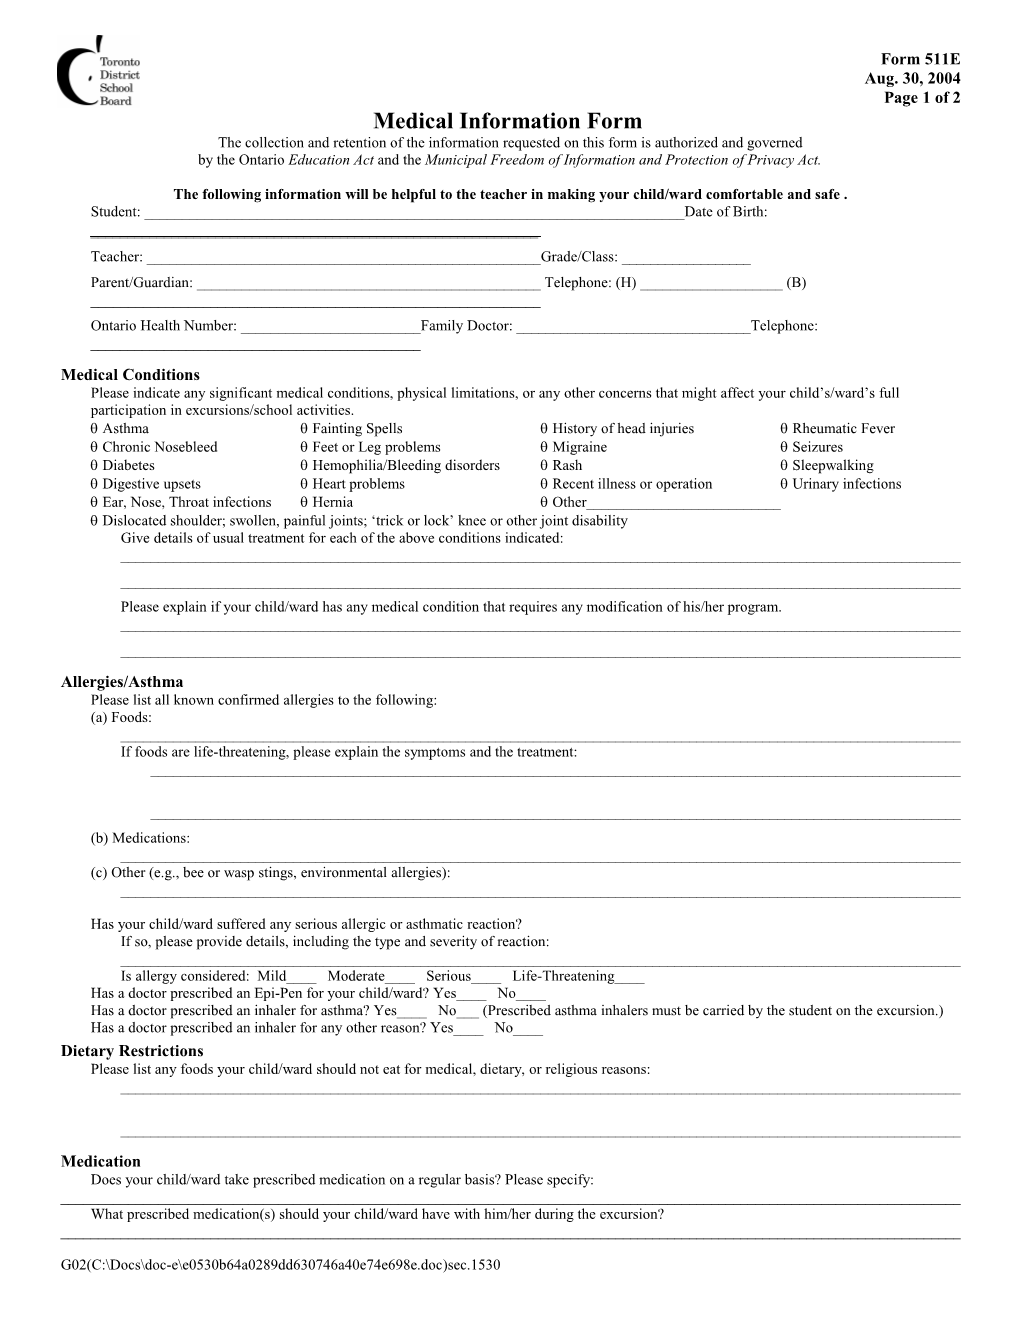 Form 511E: Medical Information for Excursions